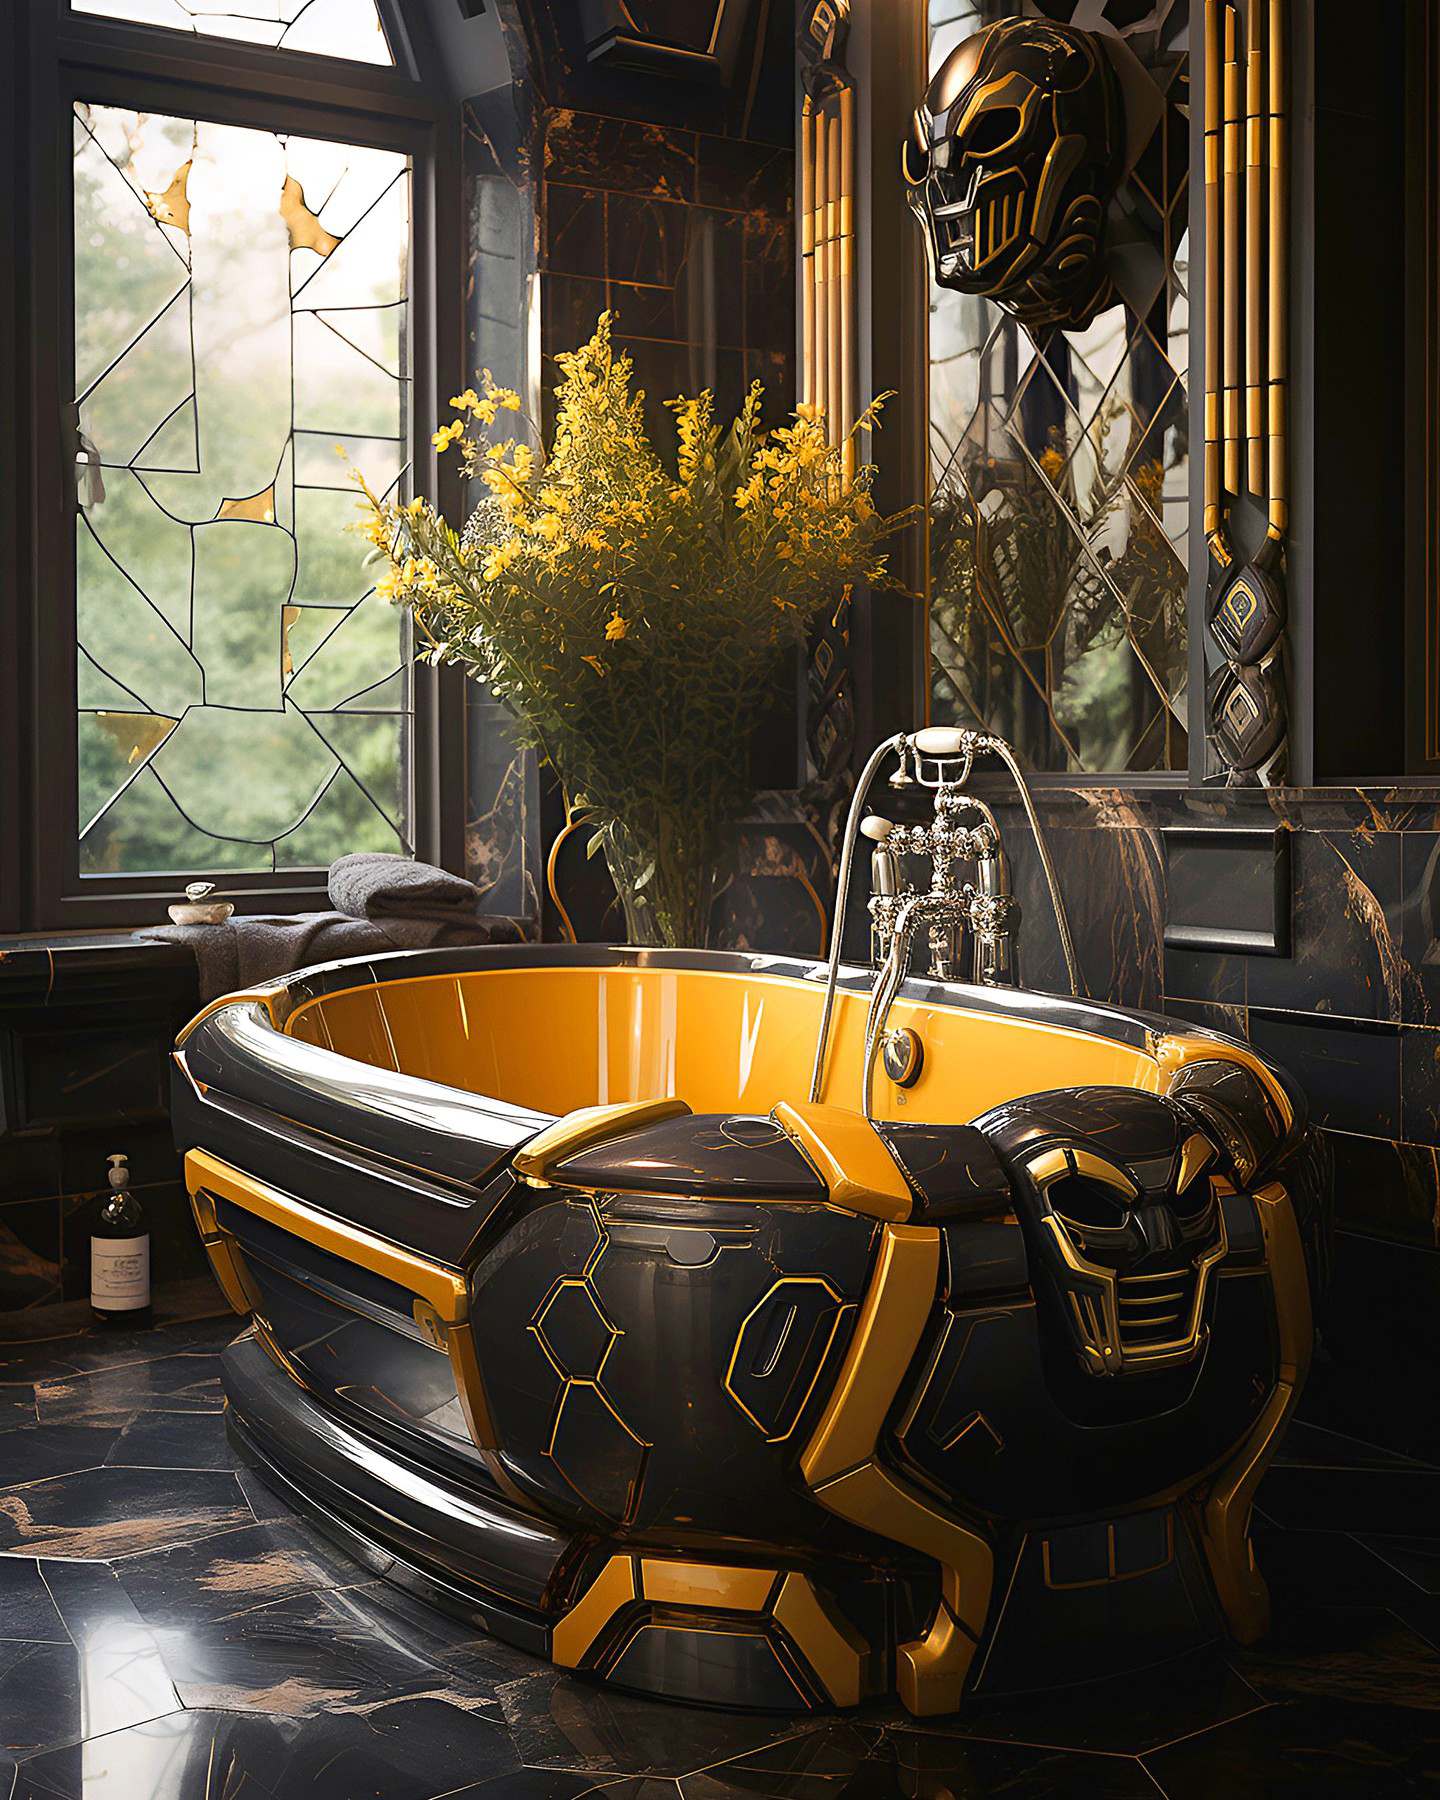 Superhero-Inspired Bathtubs: Elevate Your Relaxation in Heroic Style